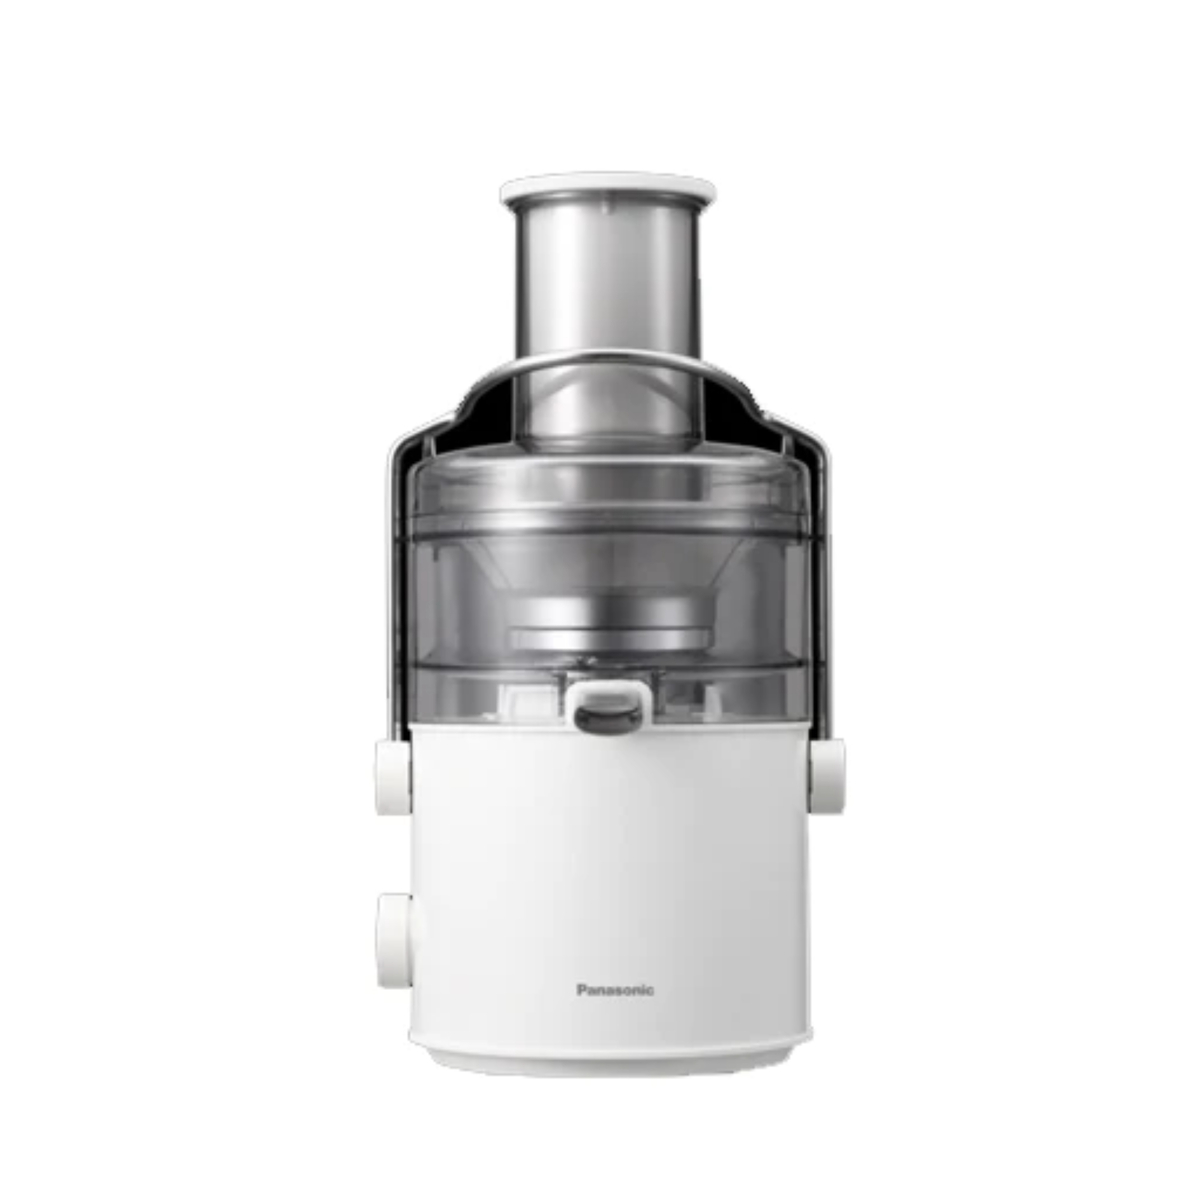 Panasonic 2L 1000W Electric Juicer with Full Metal Spinner, White, MJ-CB100WTZ